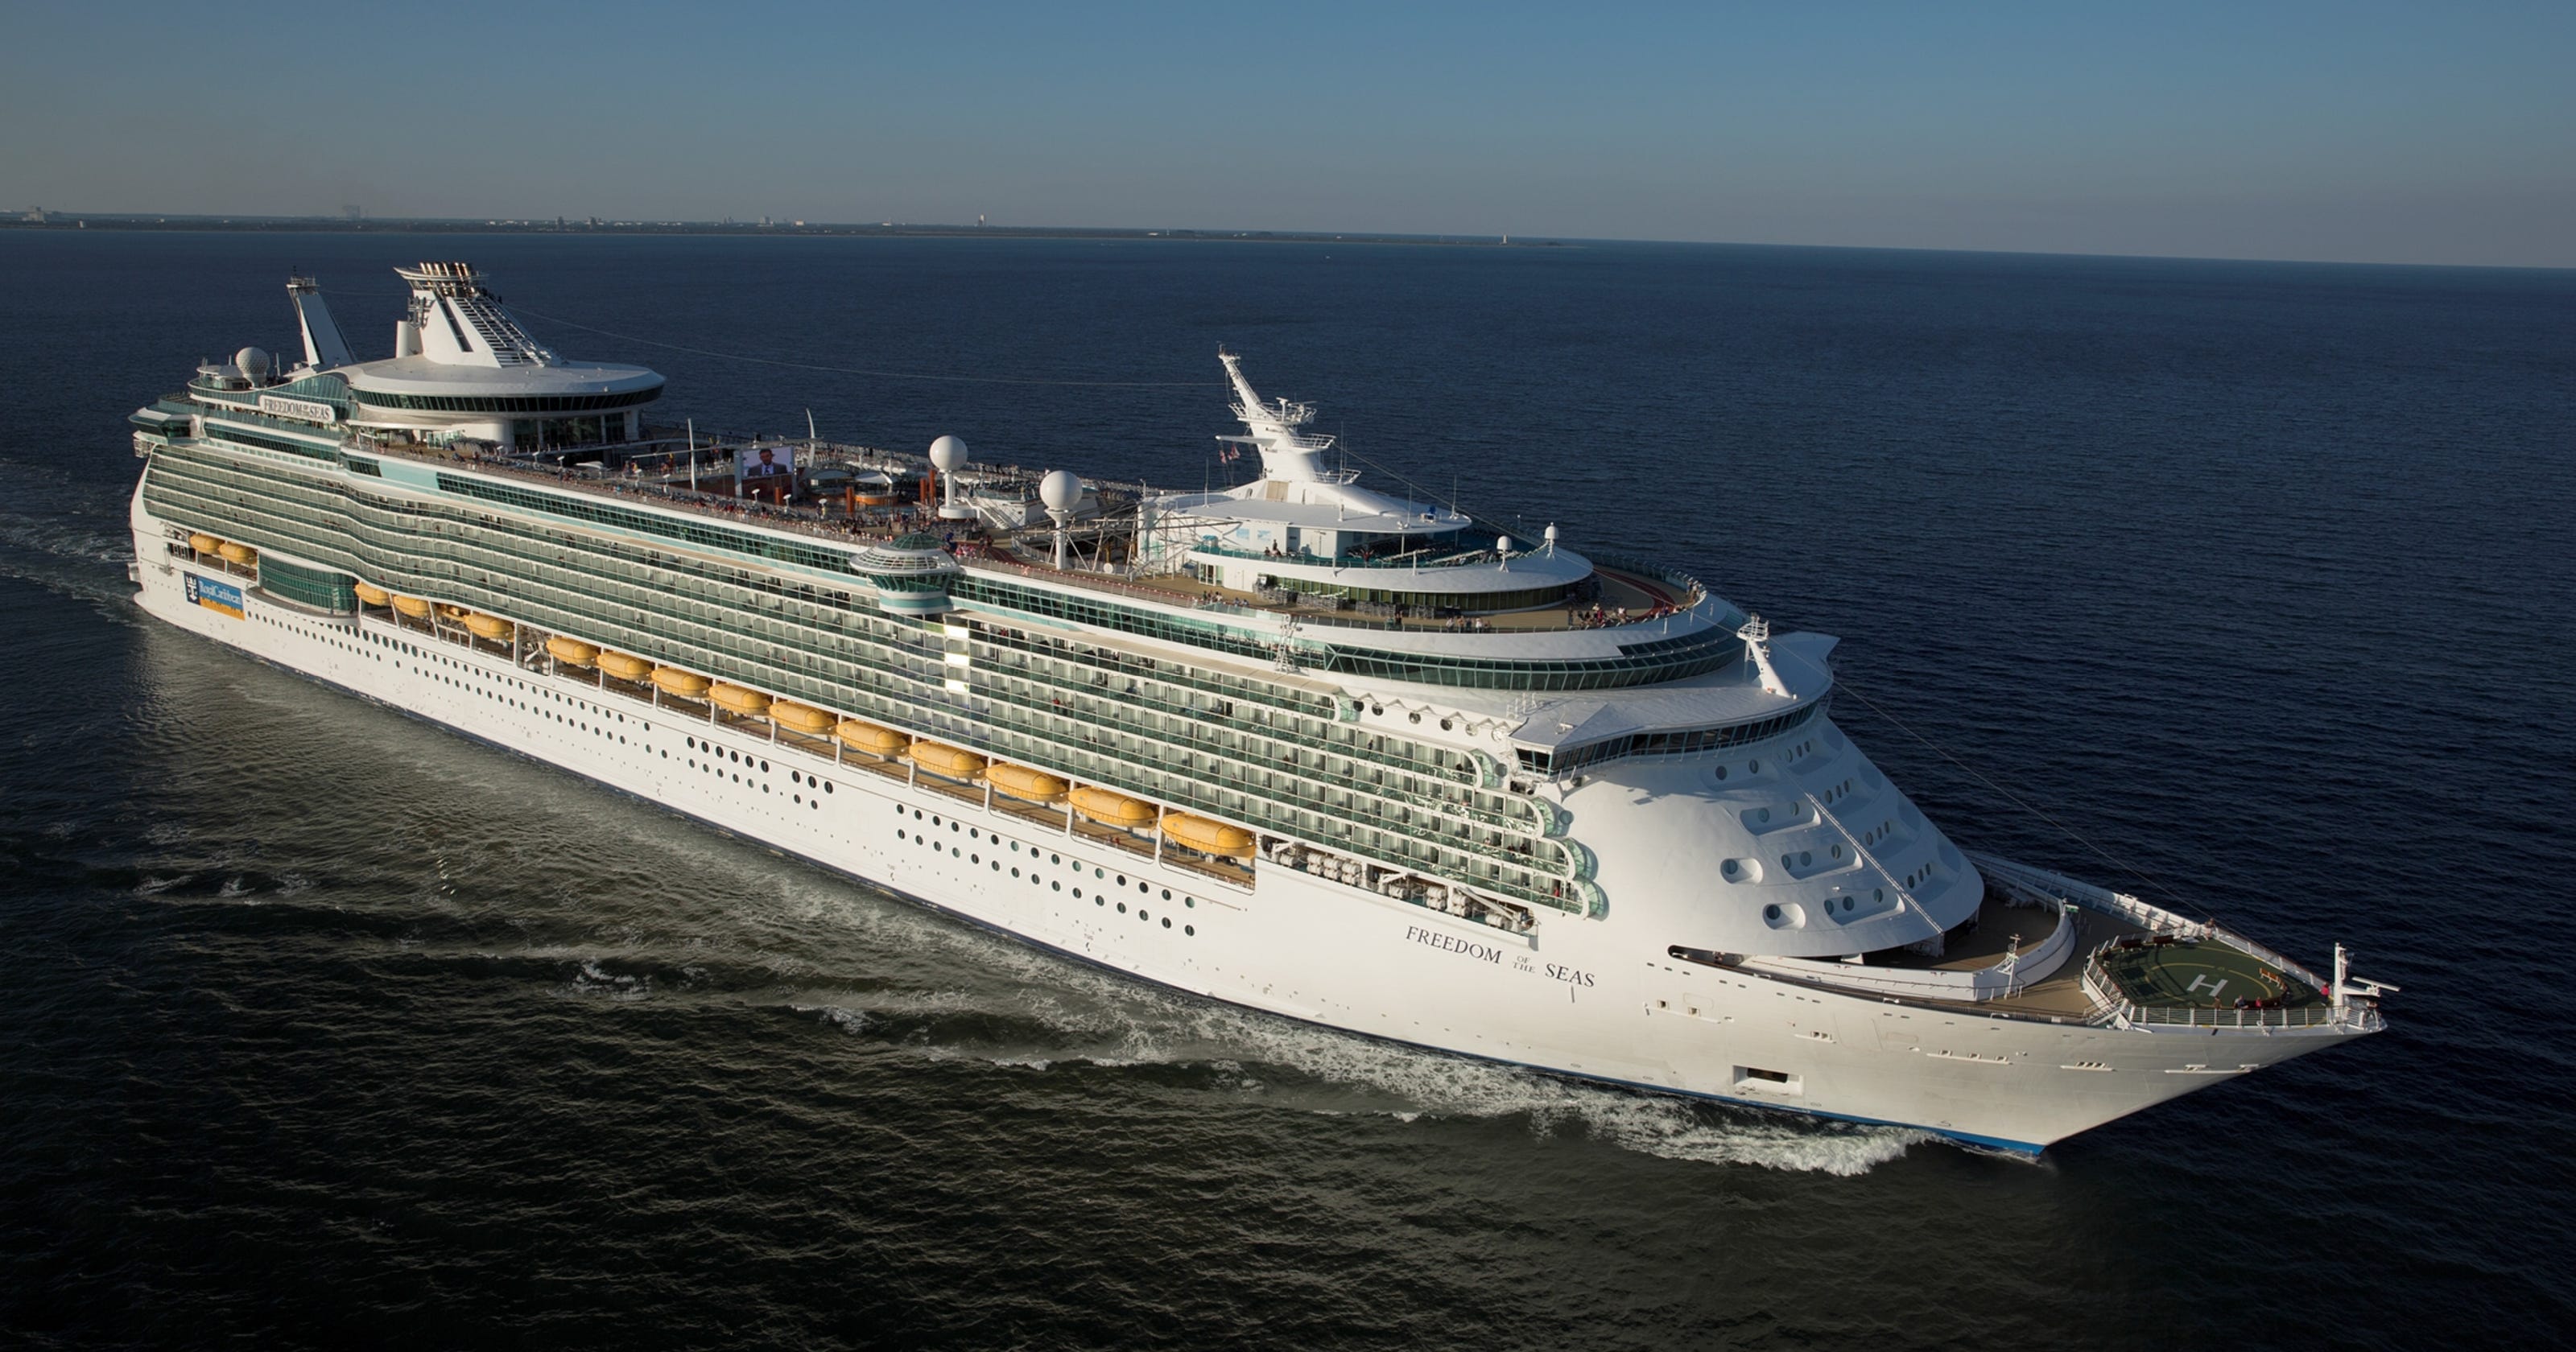 Cruise ship tours Royal Caribbean's Freedom of the Seas